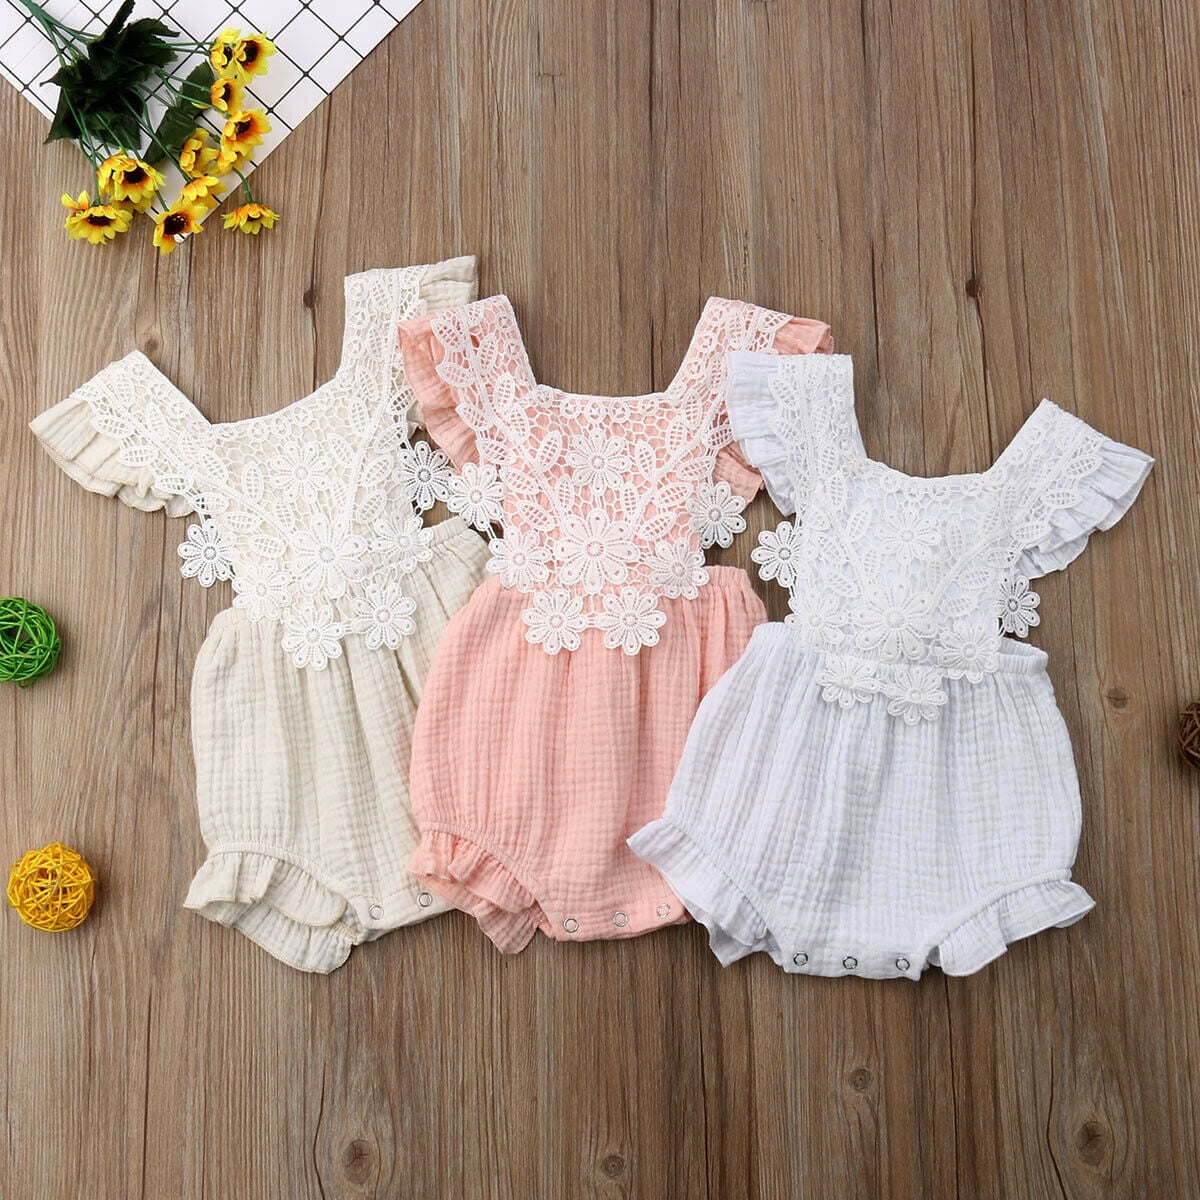 Newborn Infant Baby Girl Boy Solide Lace Bow Romper Bodysuit Clothes Outfits 